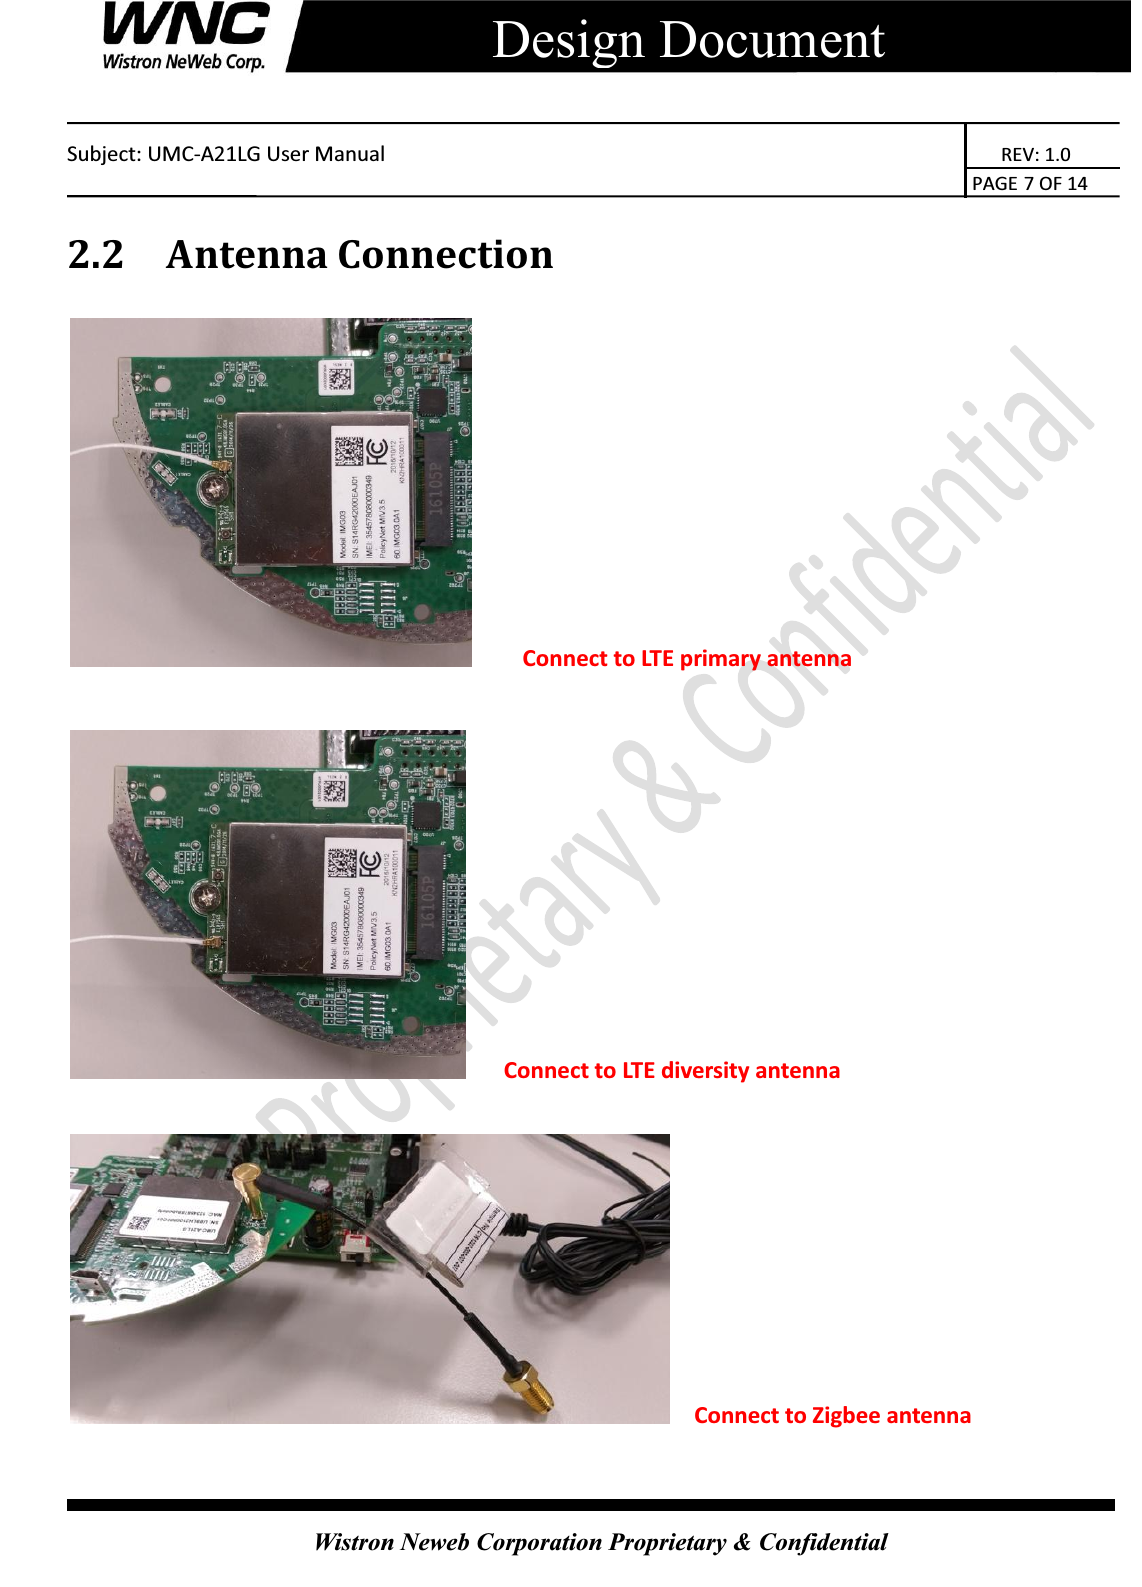    Subject: UMC-A21LG User Manual                                                          REV: 1.0                                                                                        PAGE 7 OF 14  Wistron Neweb Corporation Proprietary &amp; Confidential     Design Document 2.2 Antenna Connection     Connect to LTE primary antenna     Connect to LTE diversity antenna    Connect to Zigbee antenna    